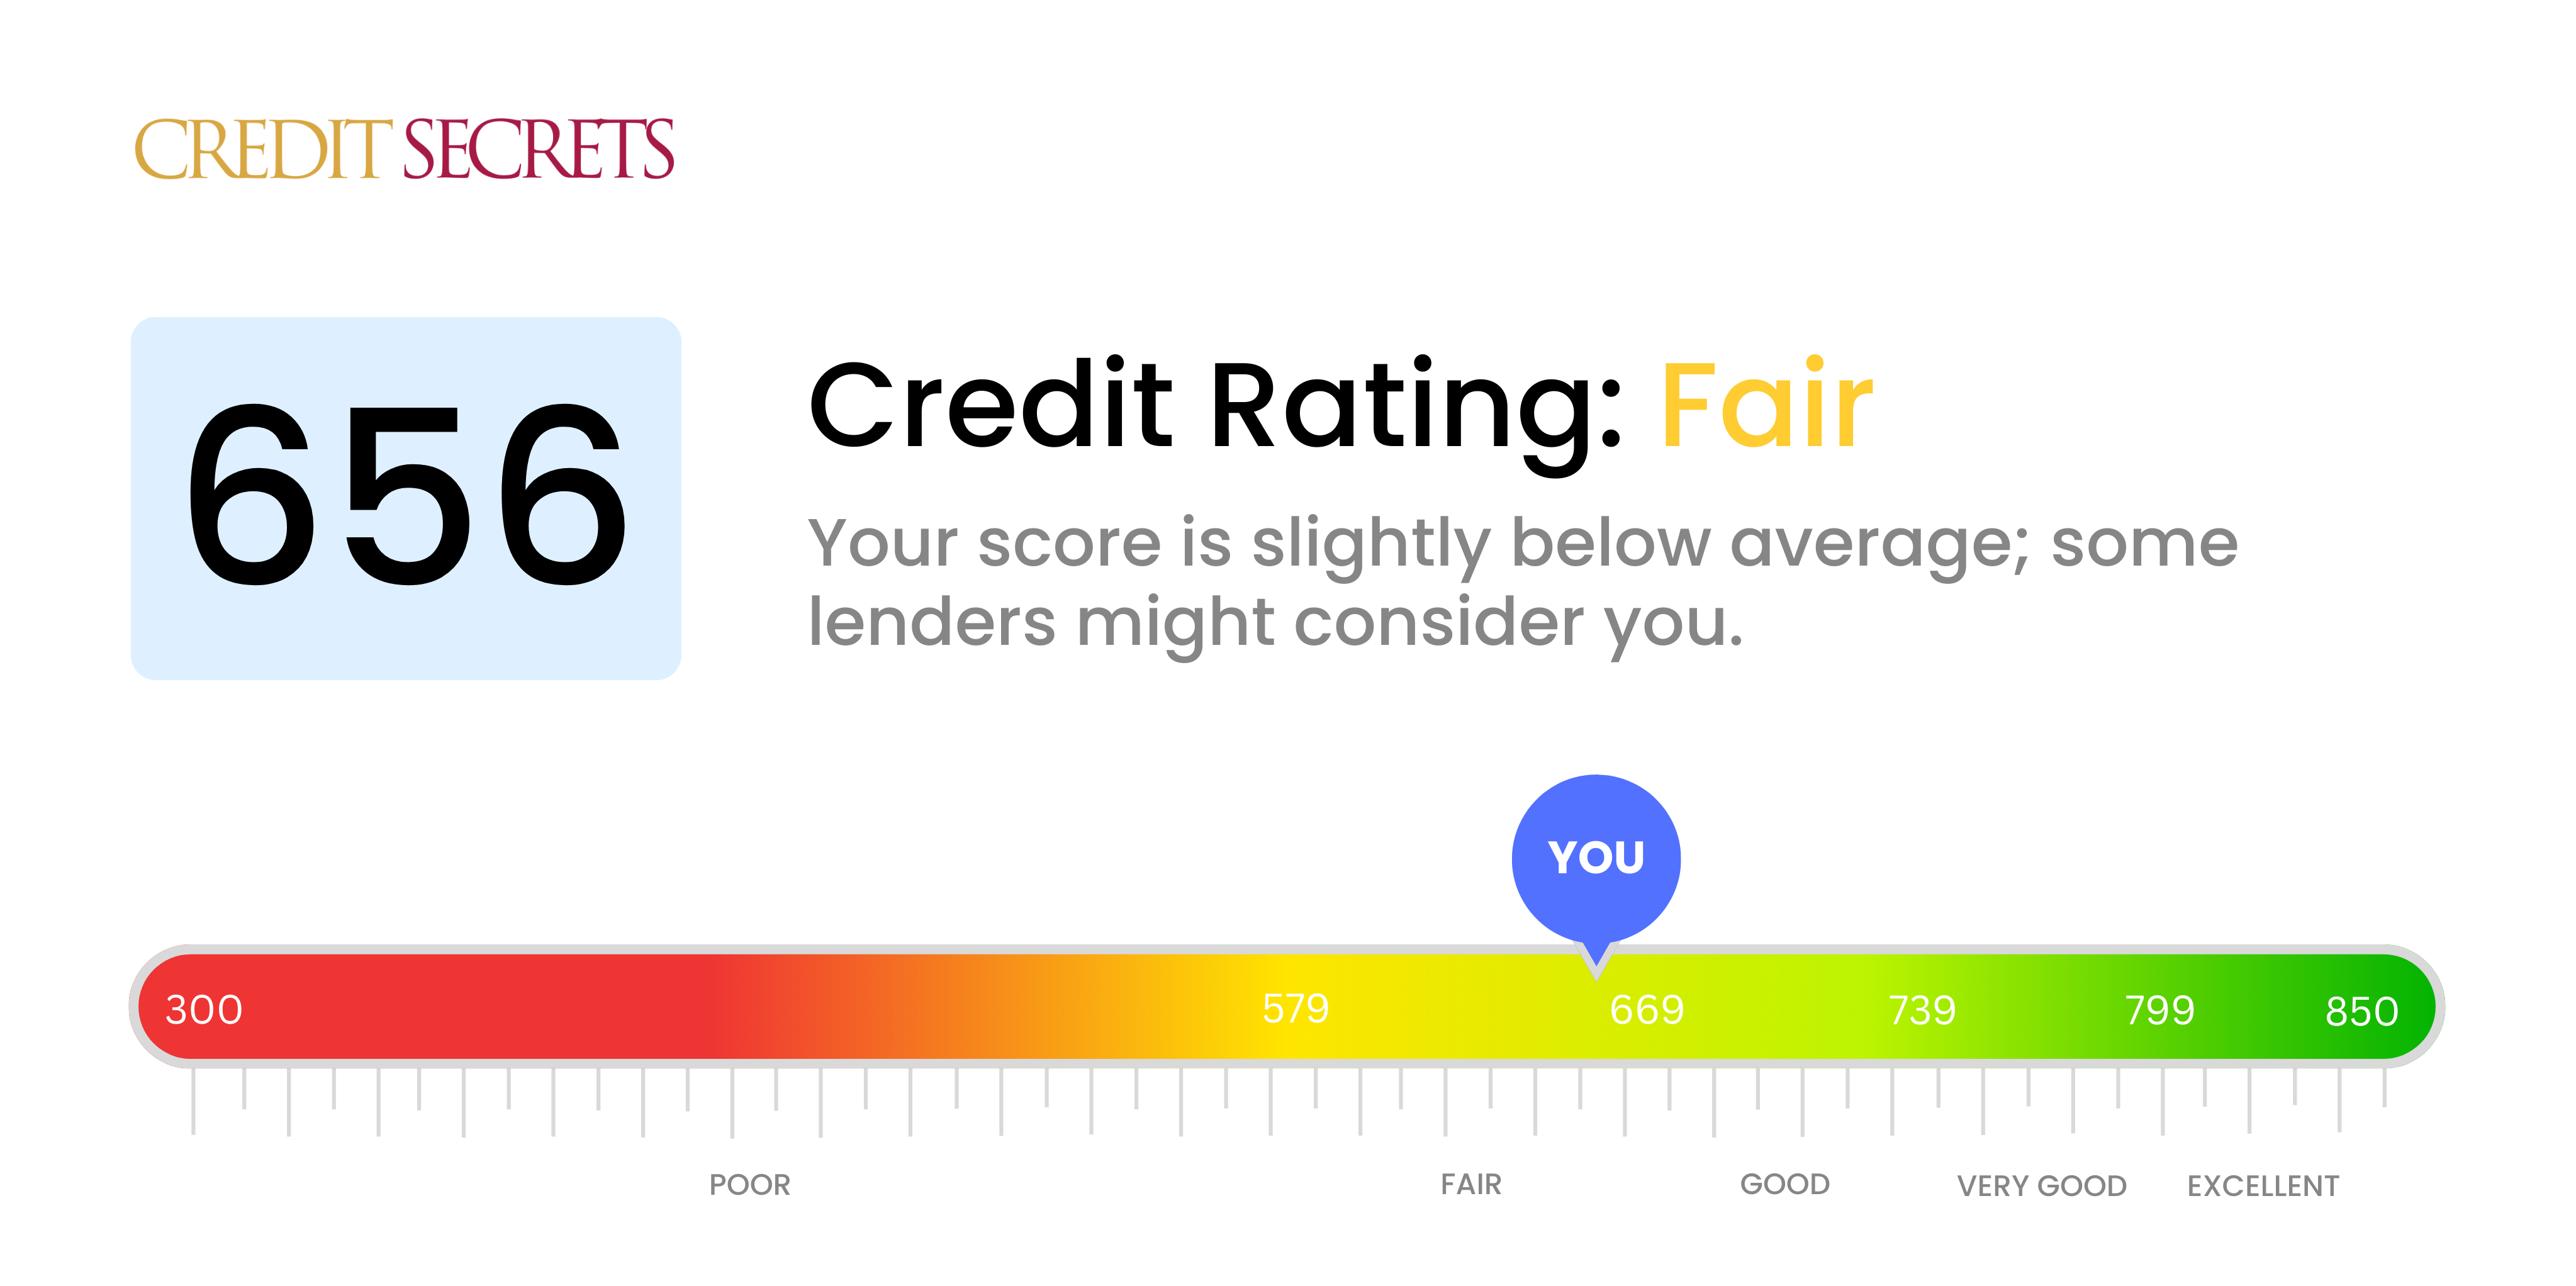 Is 656 a good credit score?